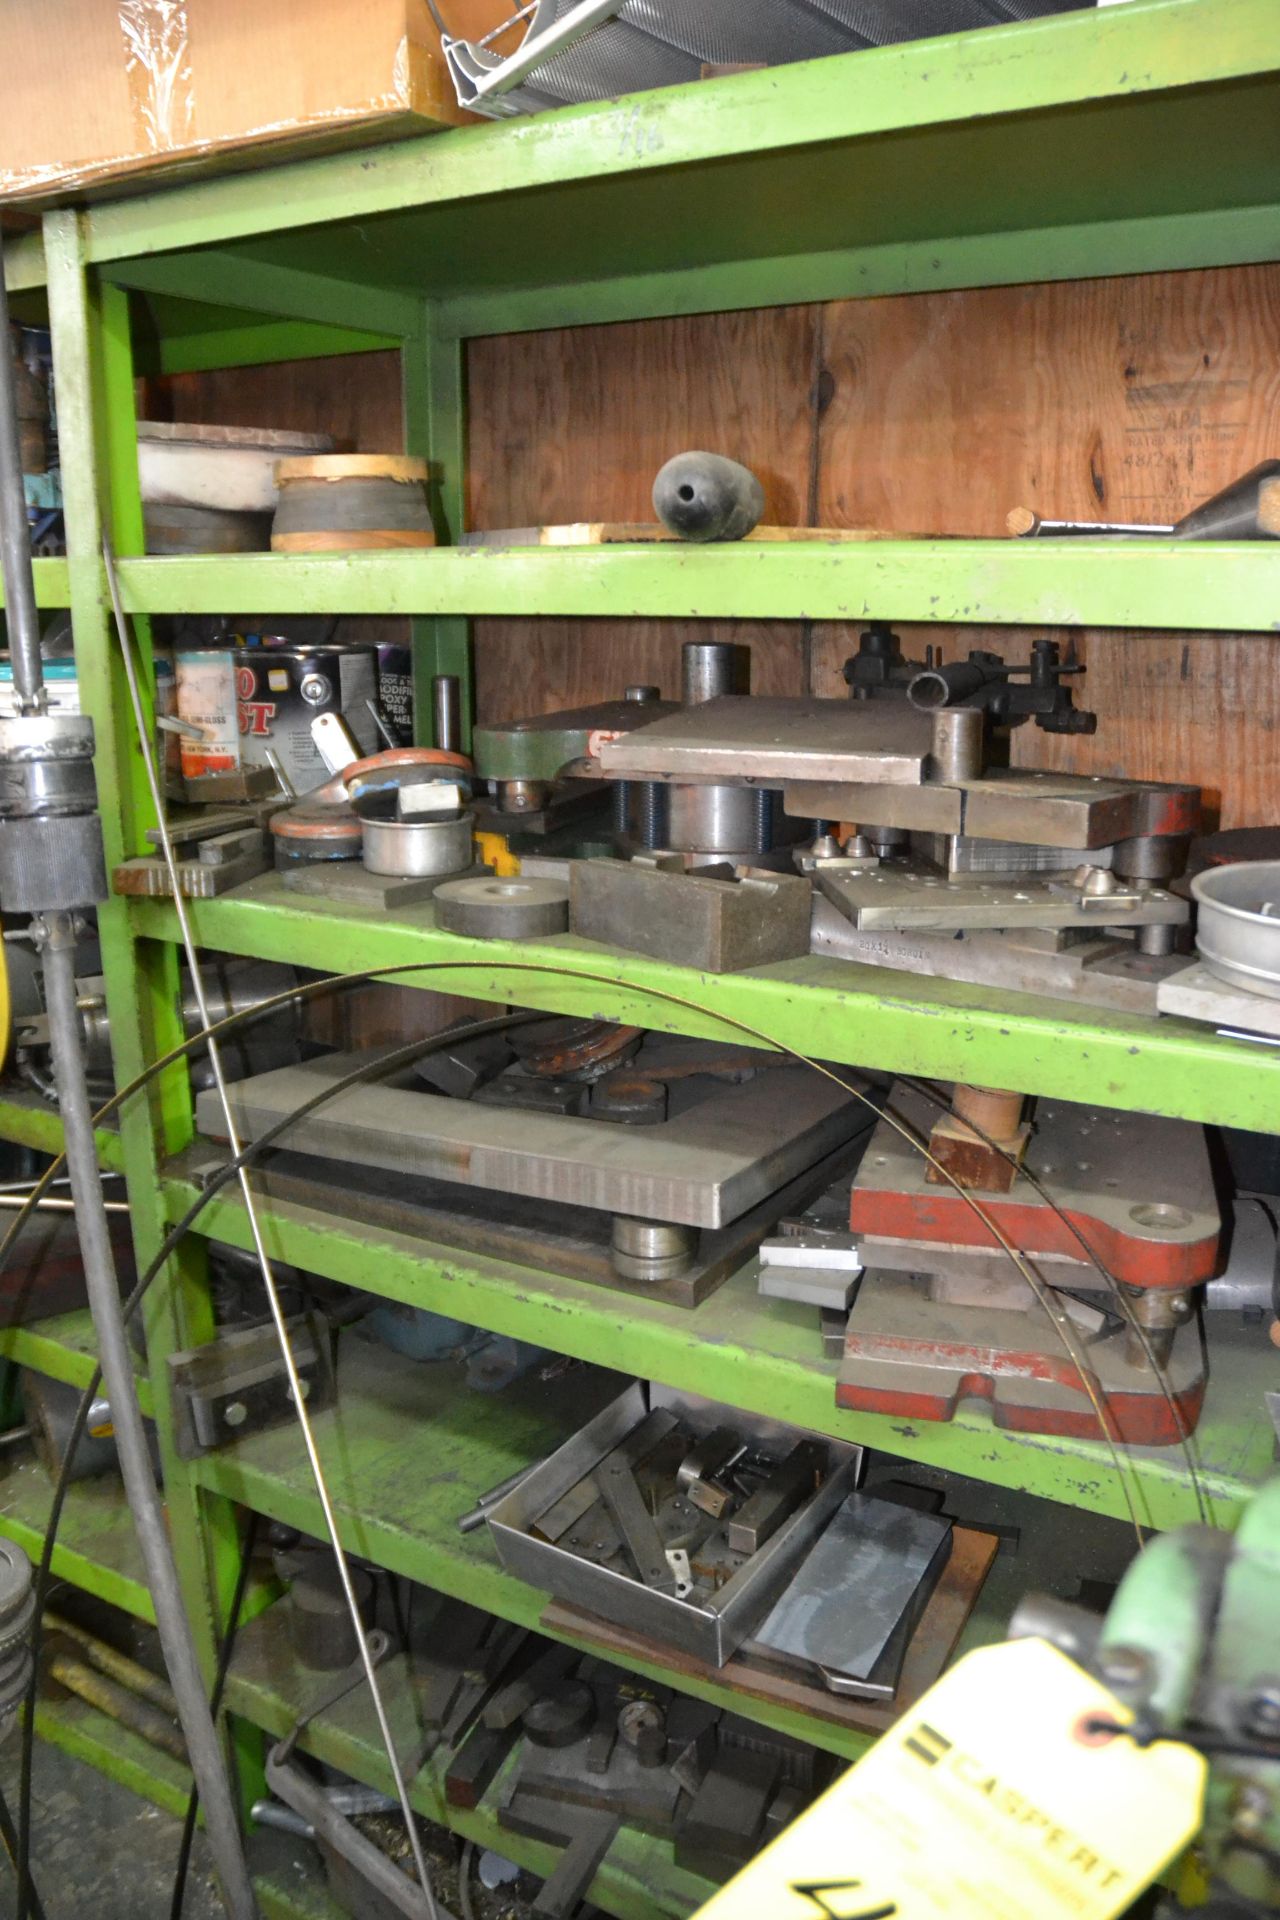 Sections of Green Steel Shelving with Contents - Image 4 of 4